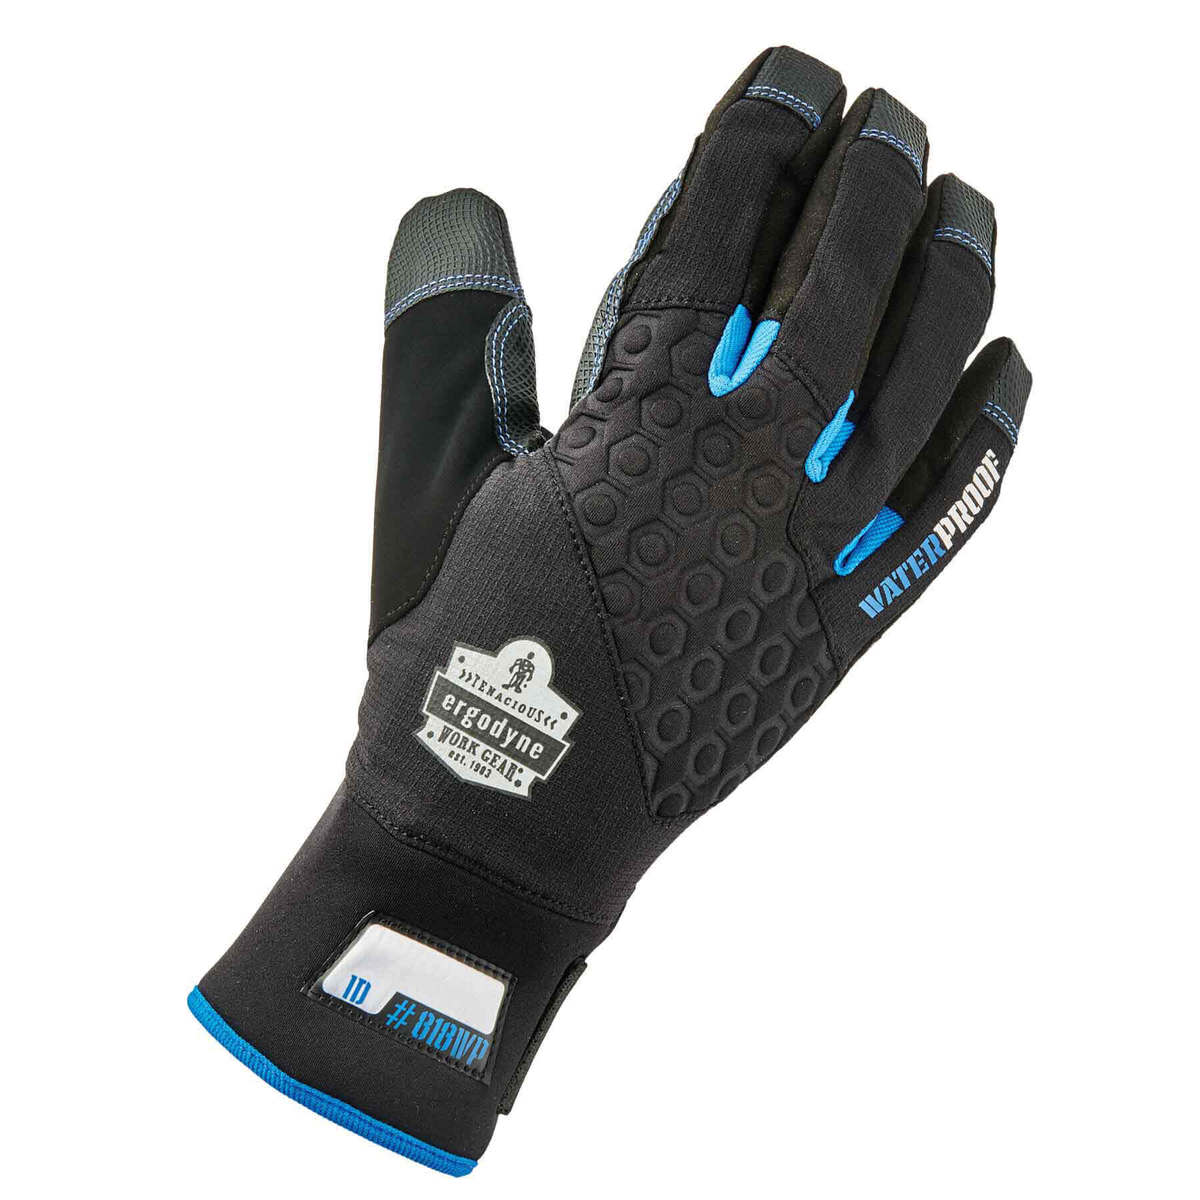 3M Thinsulate Cold Weather Work Gloves 